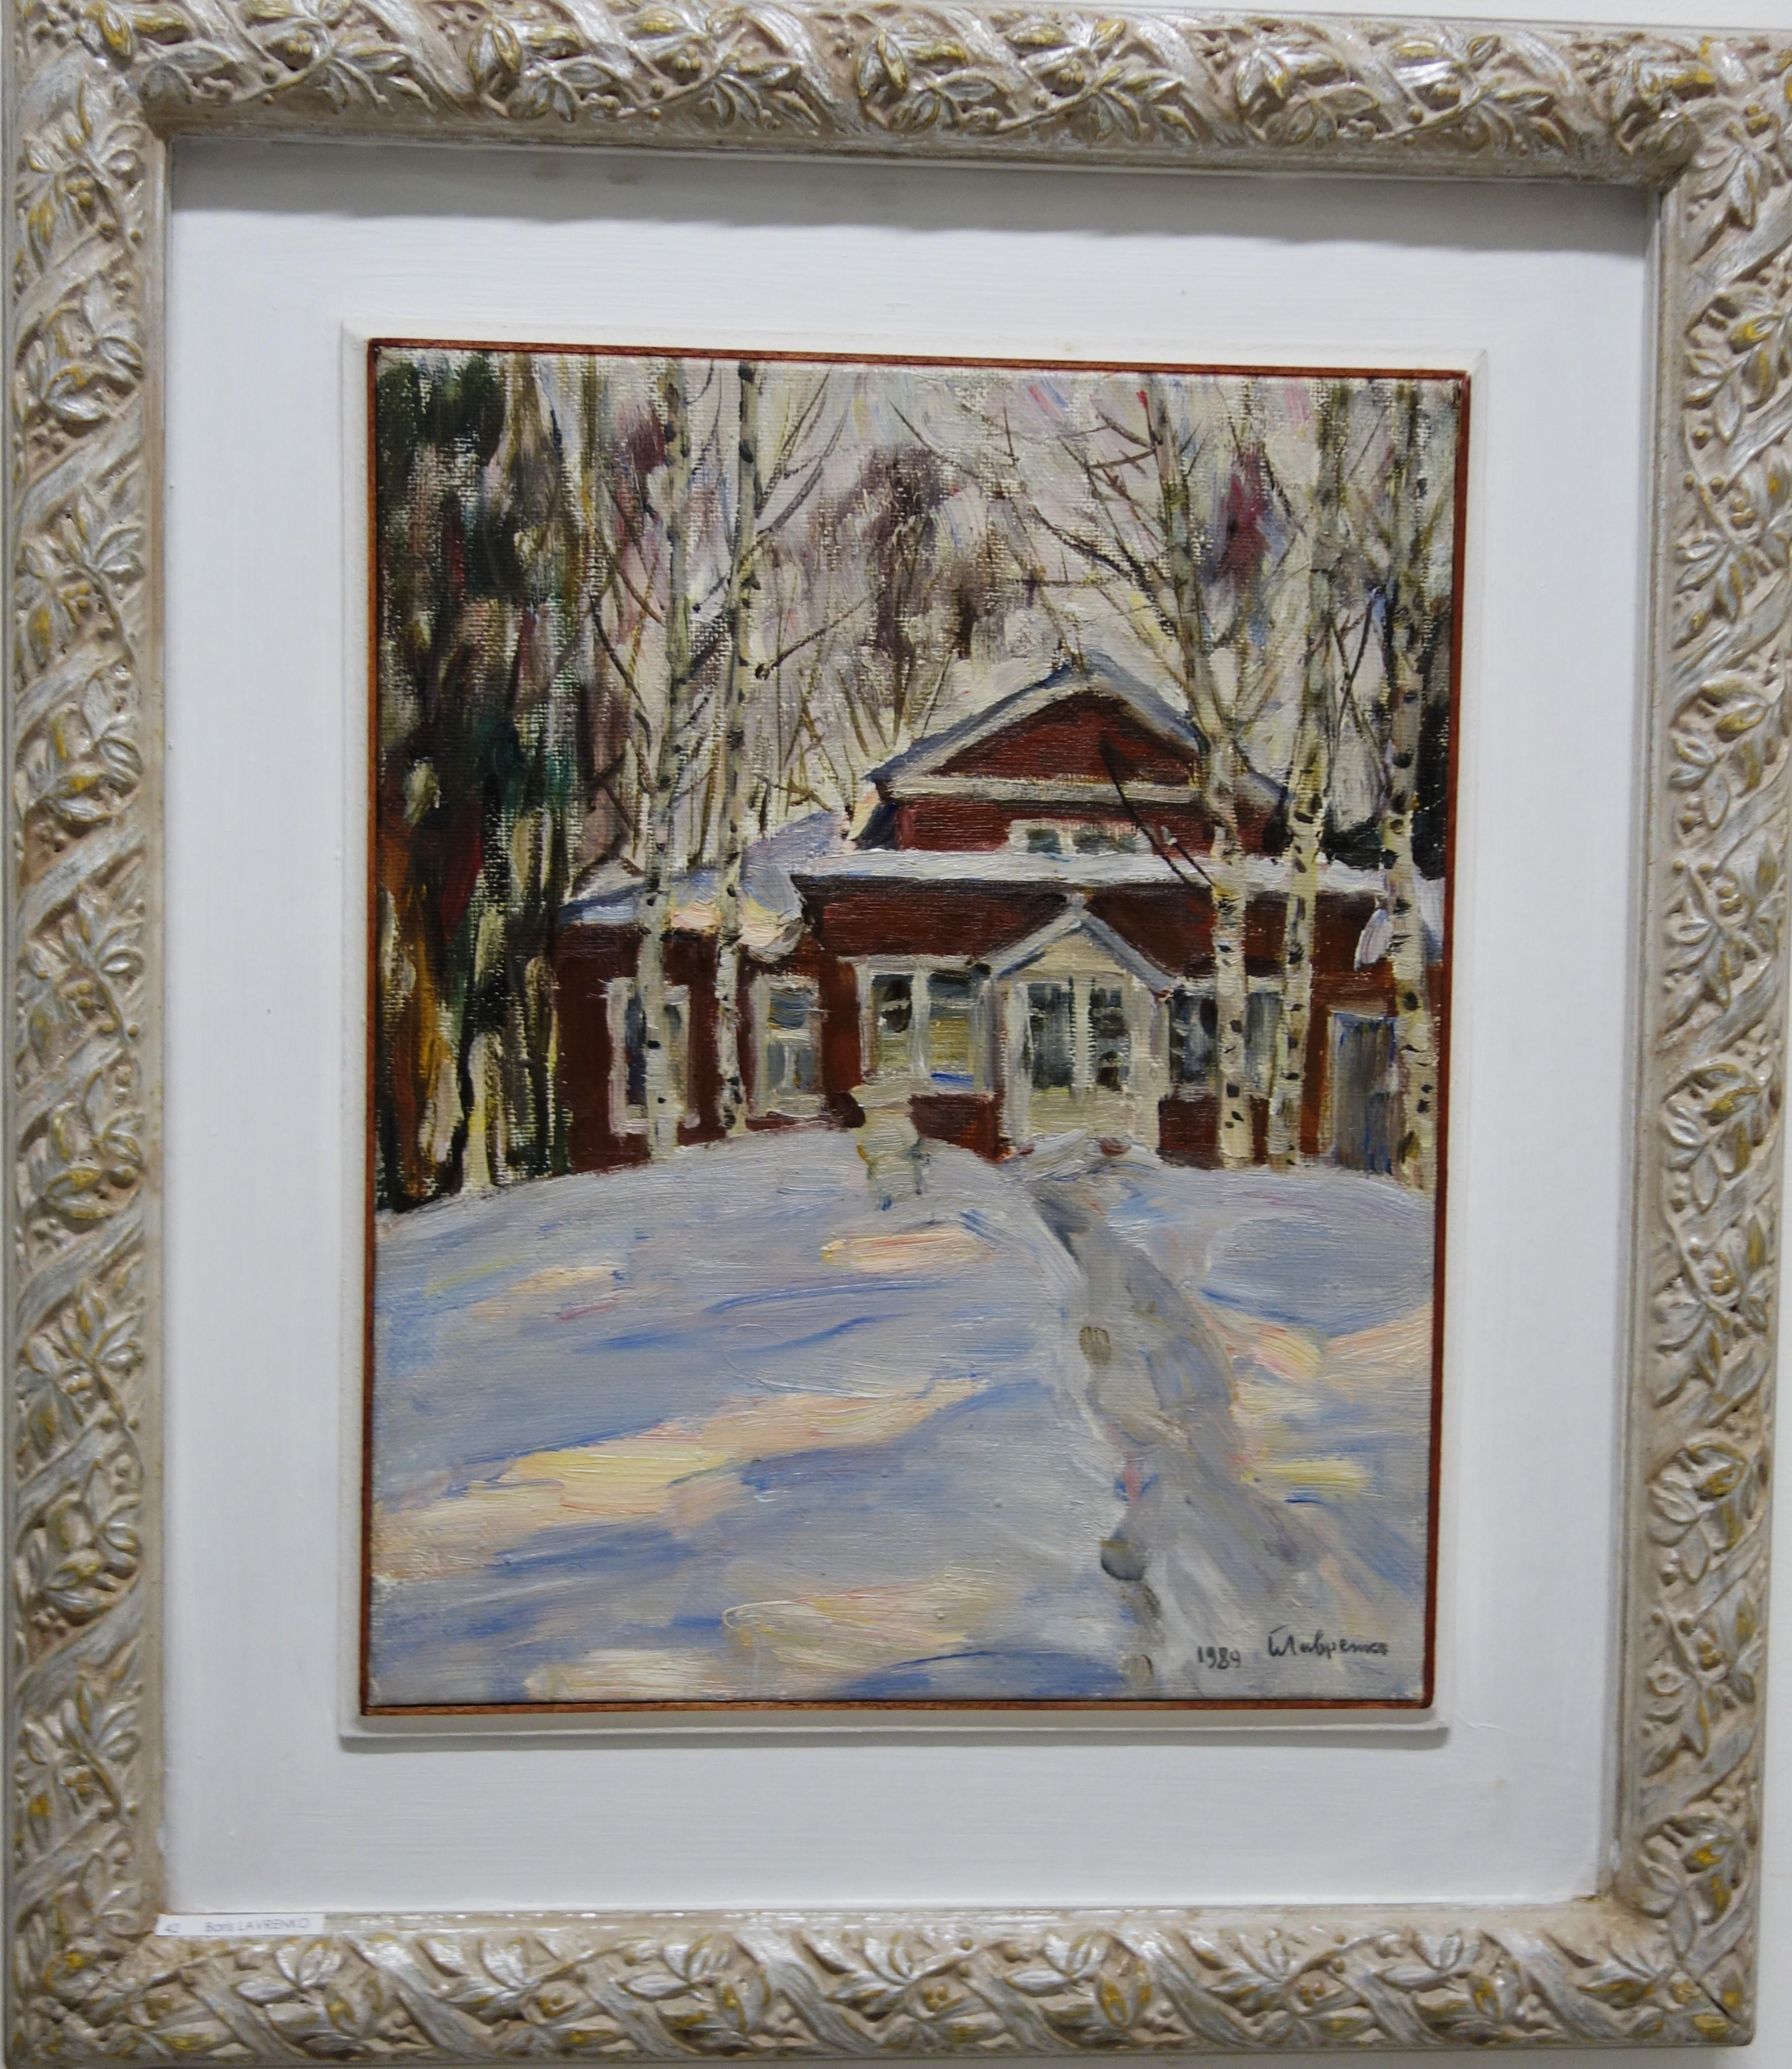 Boris LAVRENKO Figurative Painting - "Red house" Snow, Forest, White, Red, Christmas, Oil  cm. 34 x 43  1989